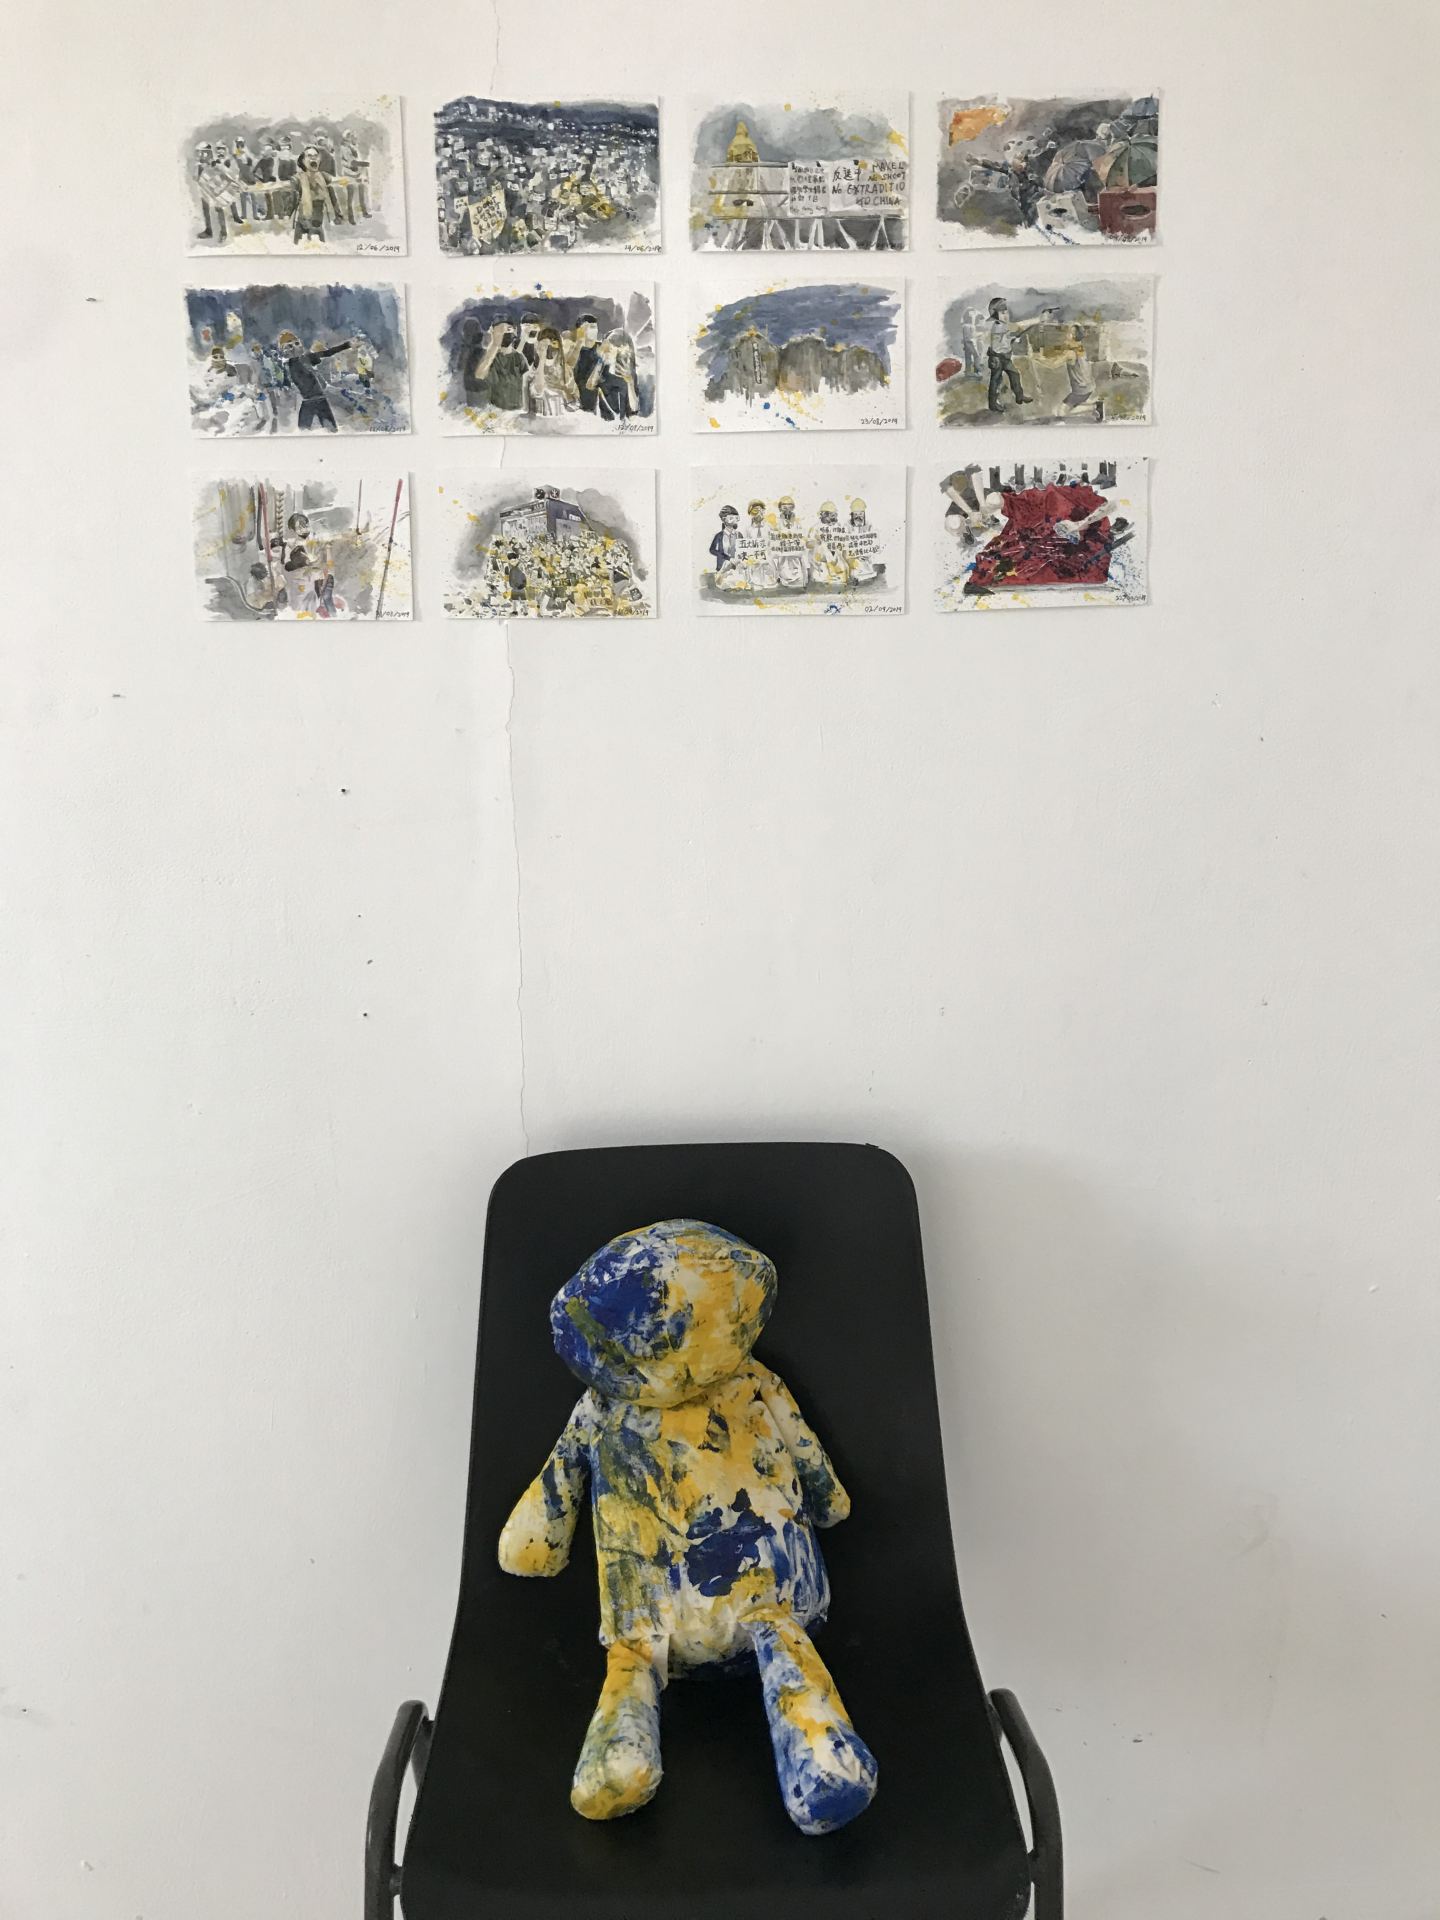 A paint-splattered teddy sits on a chair beneath 12 watercolour paintings.